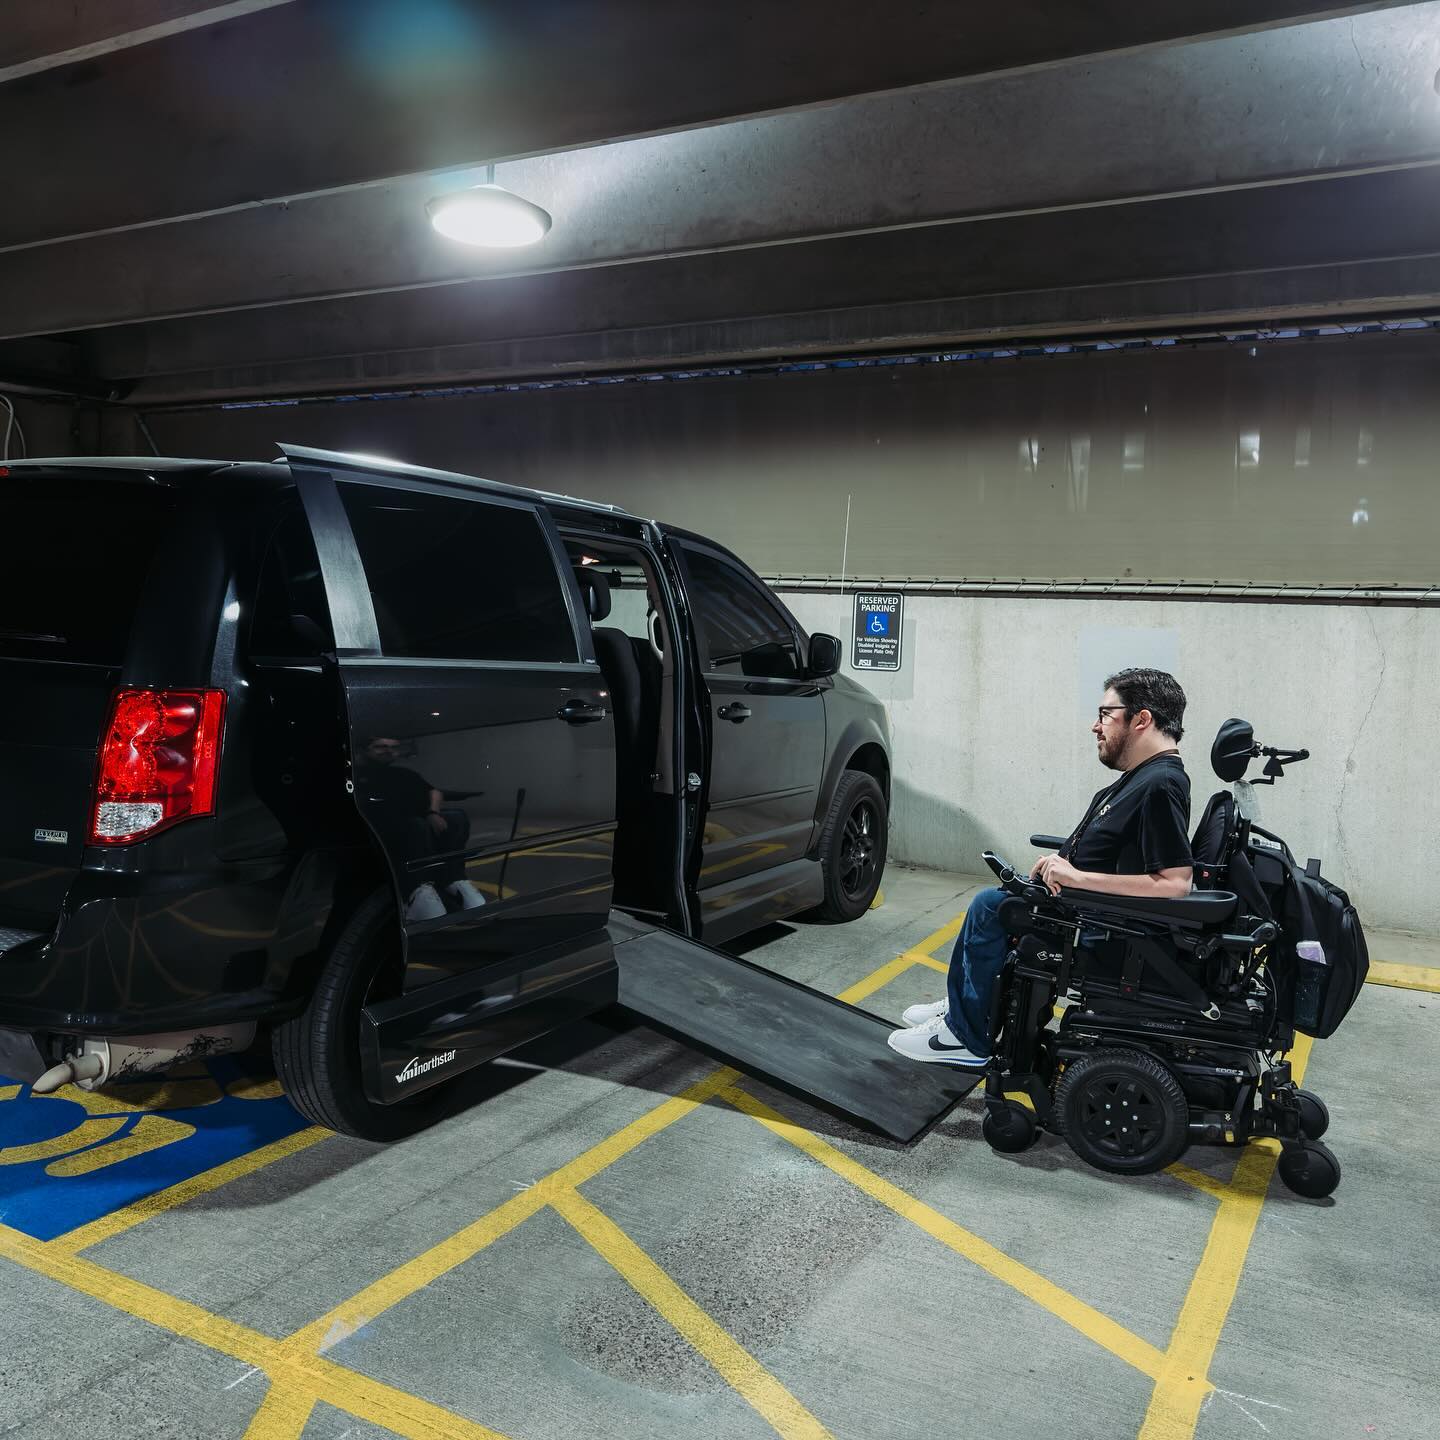 There needs to be more reliable and affordable transportation options for people with disabilities. Visit the link in my